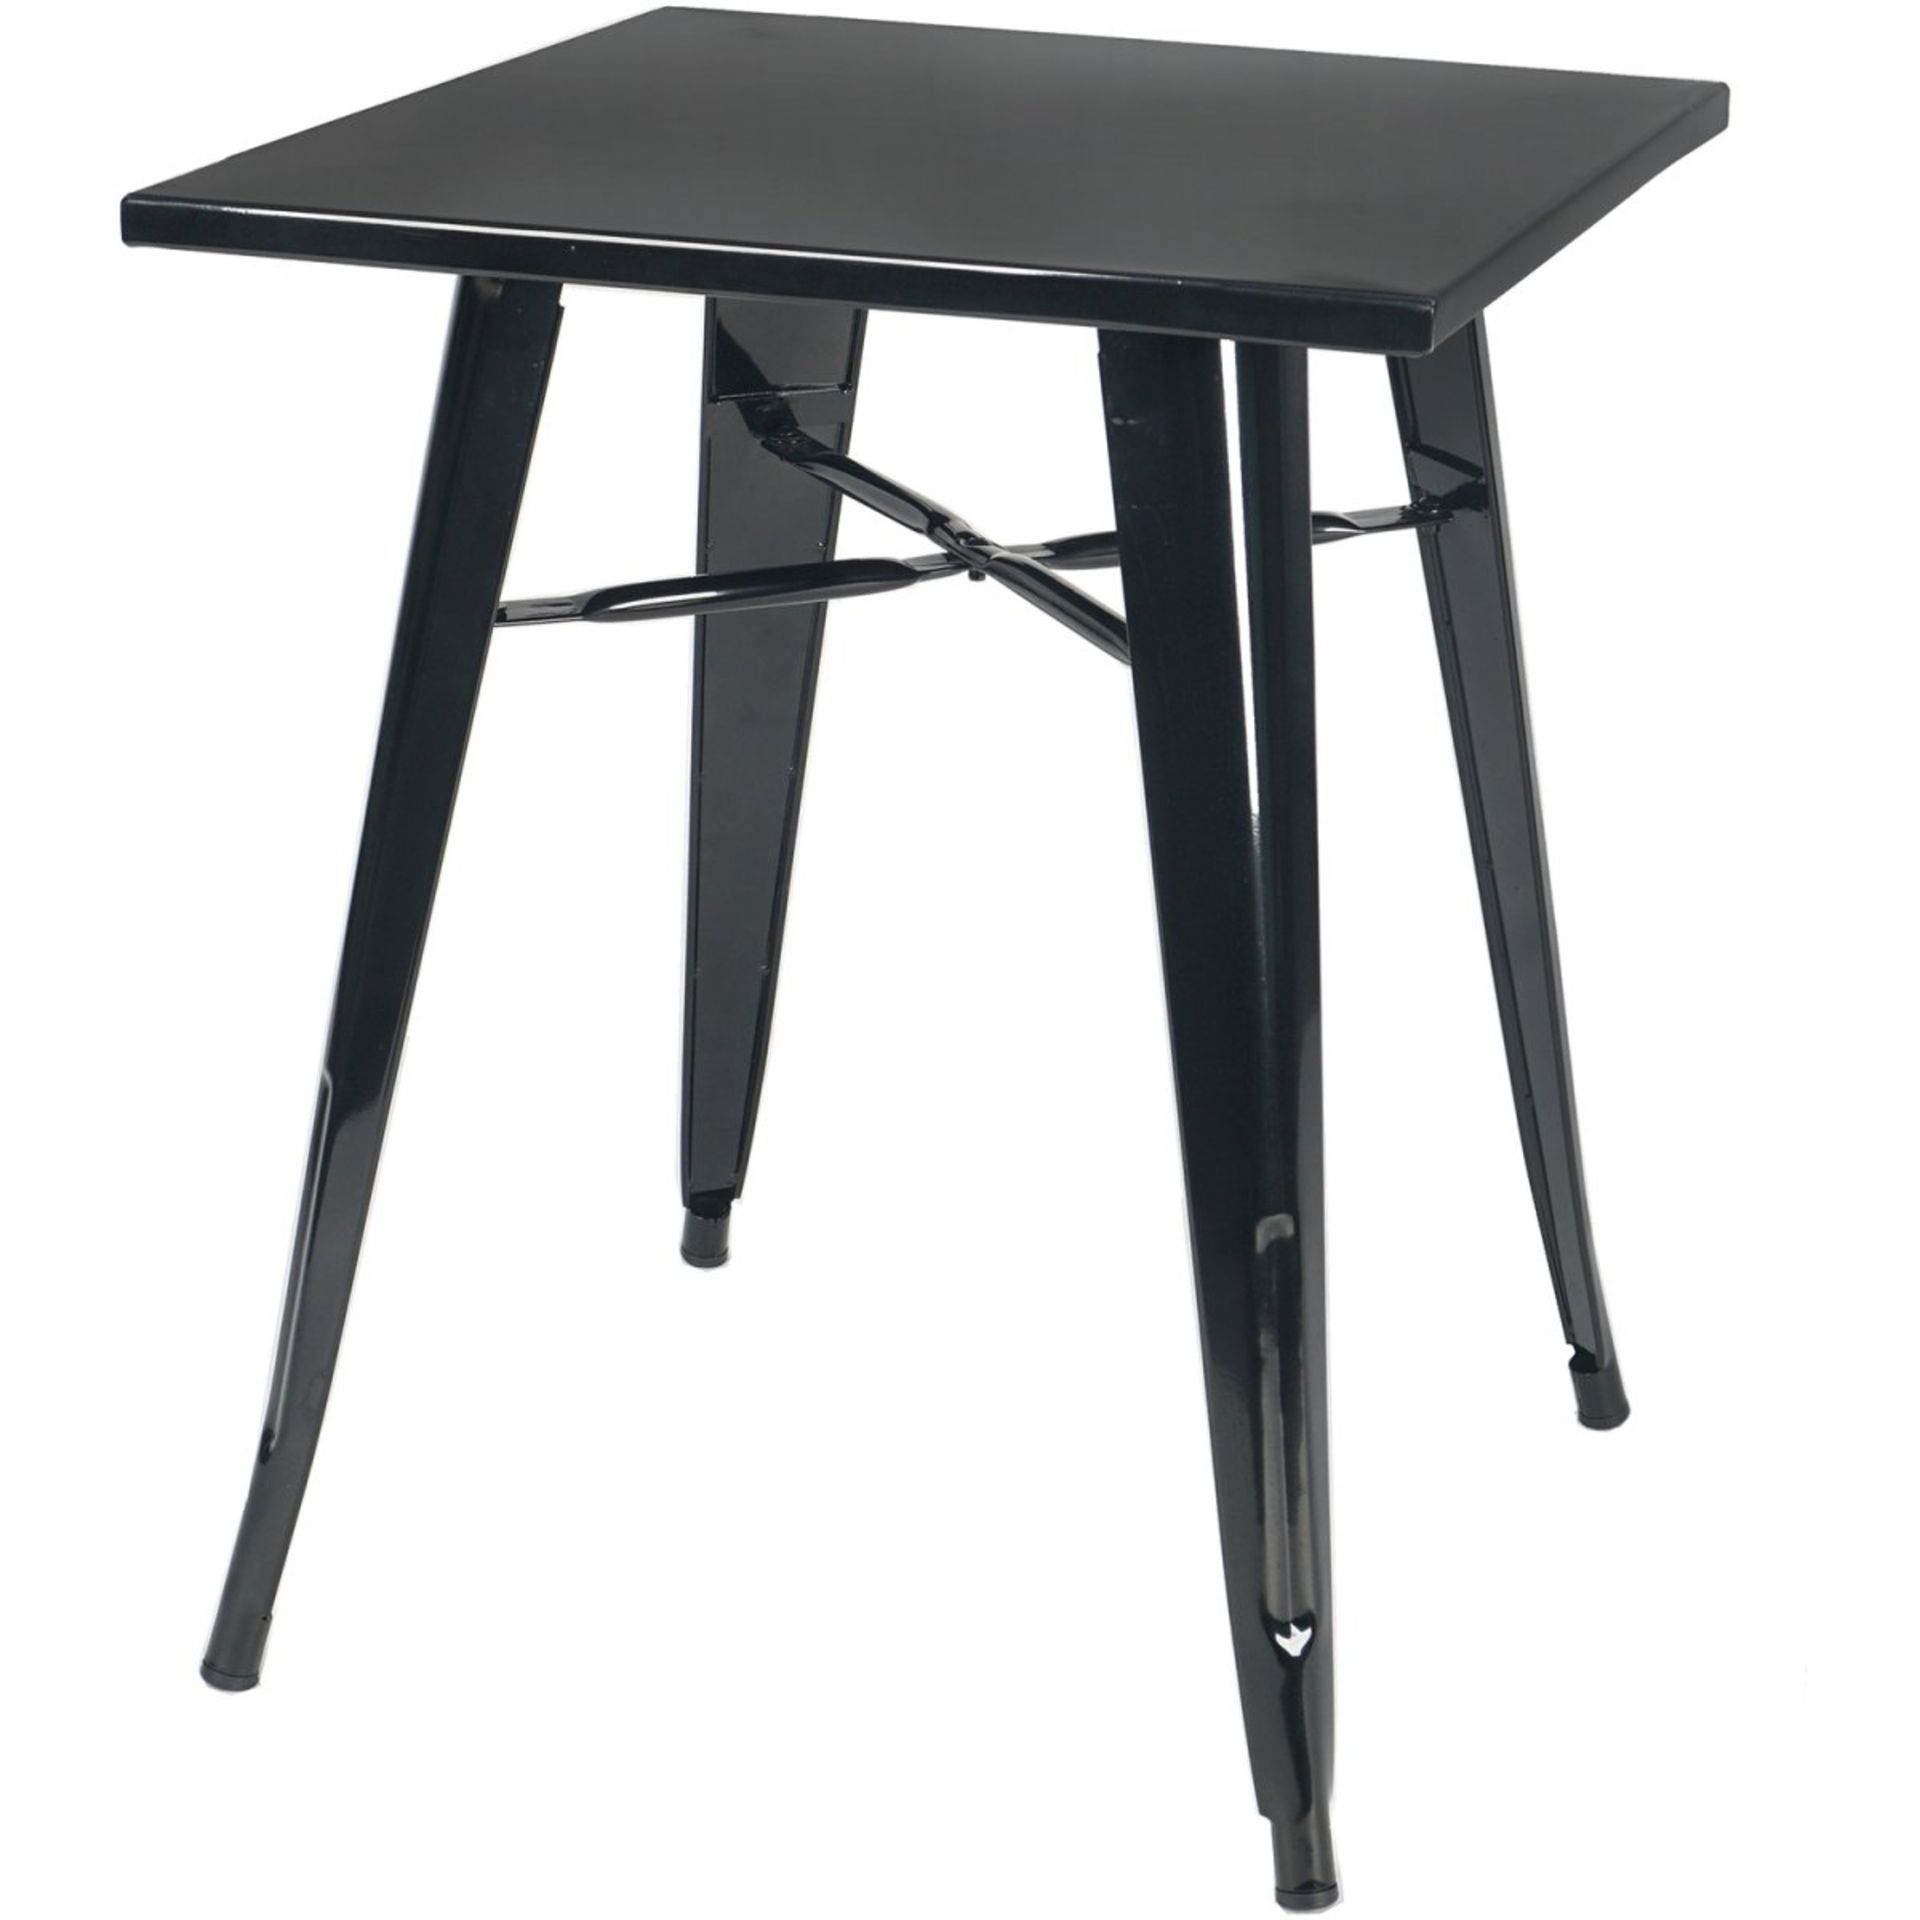 1 x Tolix Industrial Style Outdoor Bistro Table and Chair Set in Black - Includes 1 x Table and 4 - Image 3 of 6